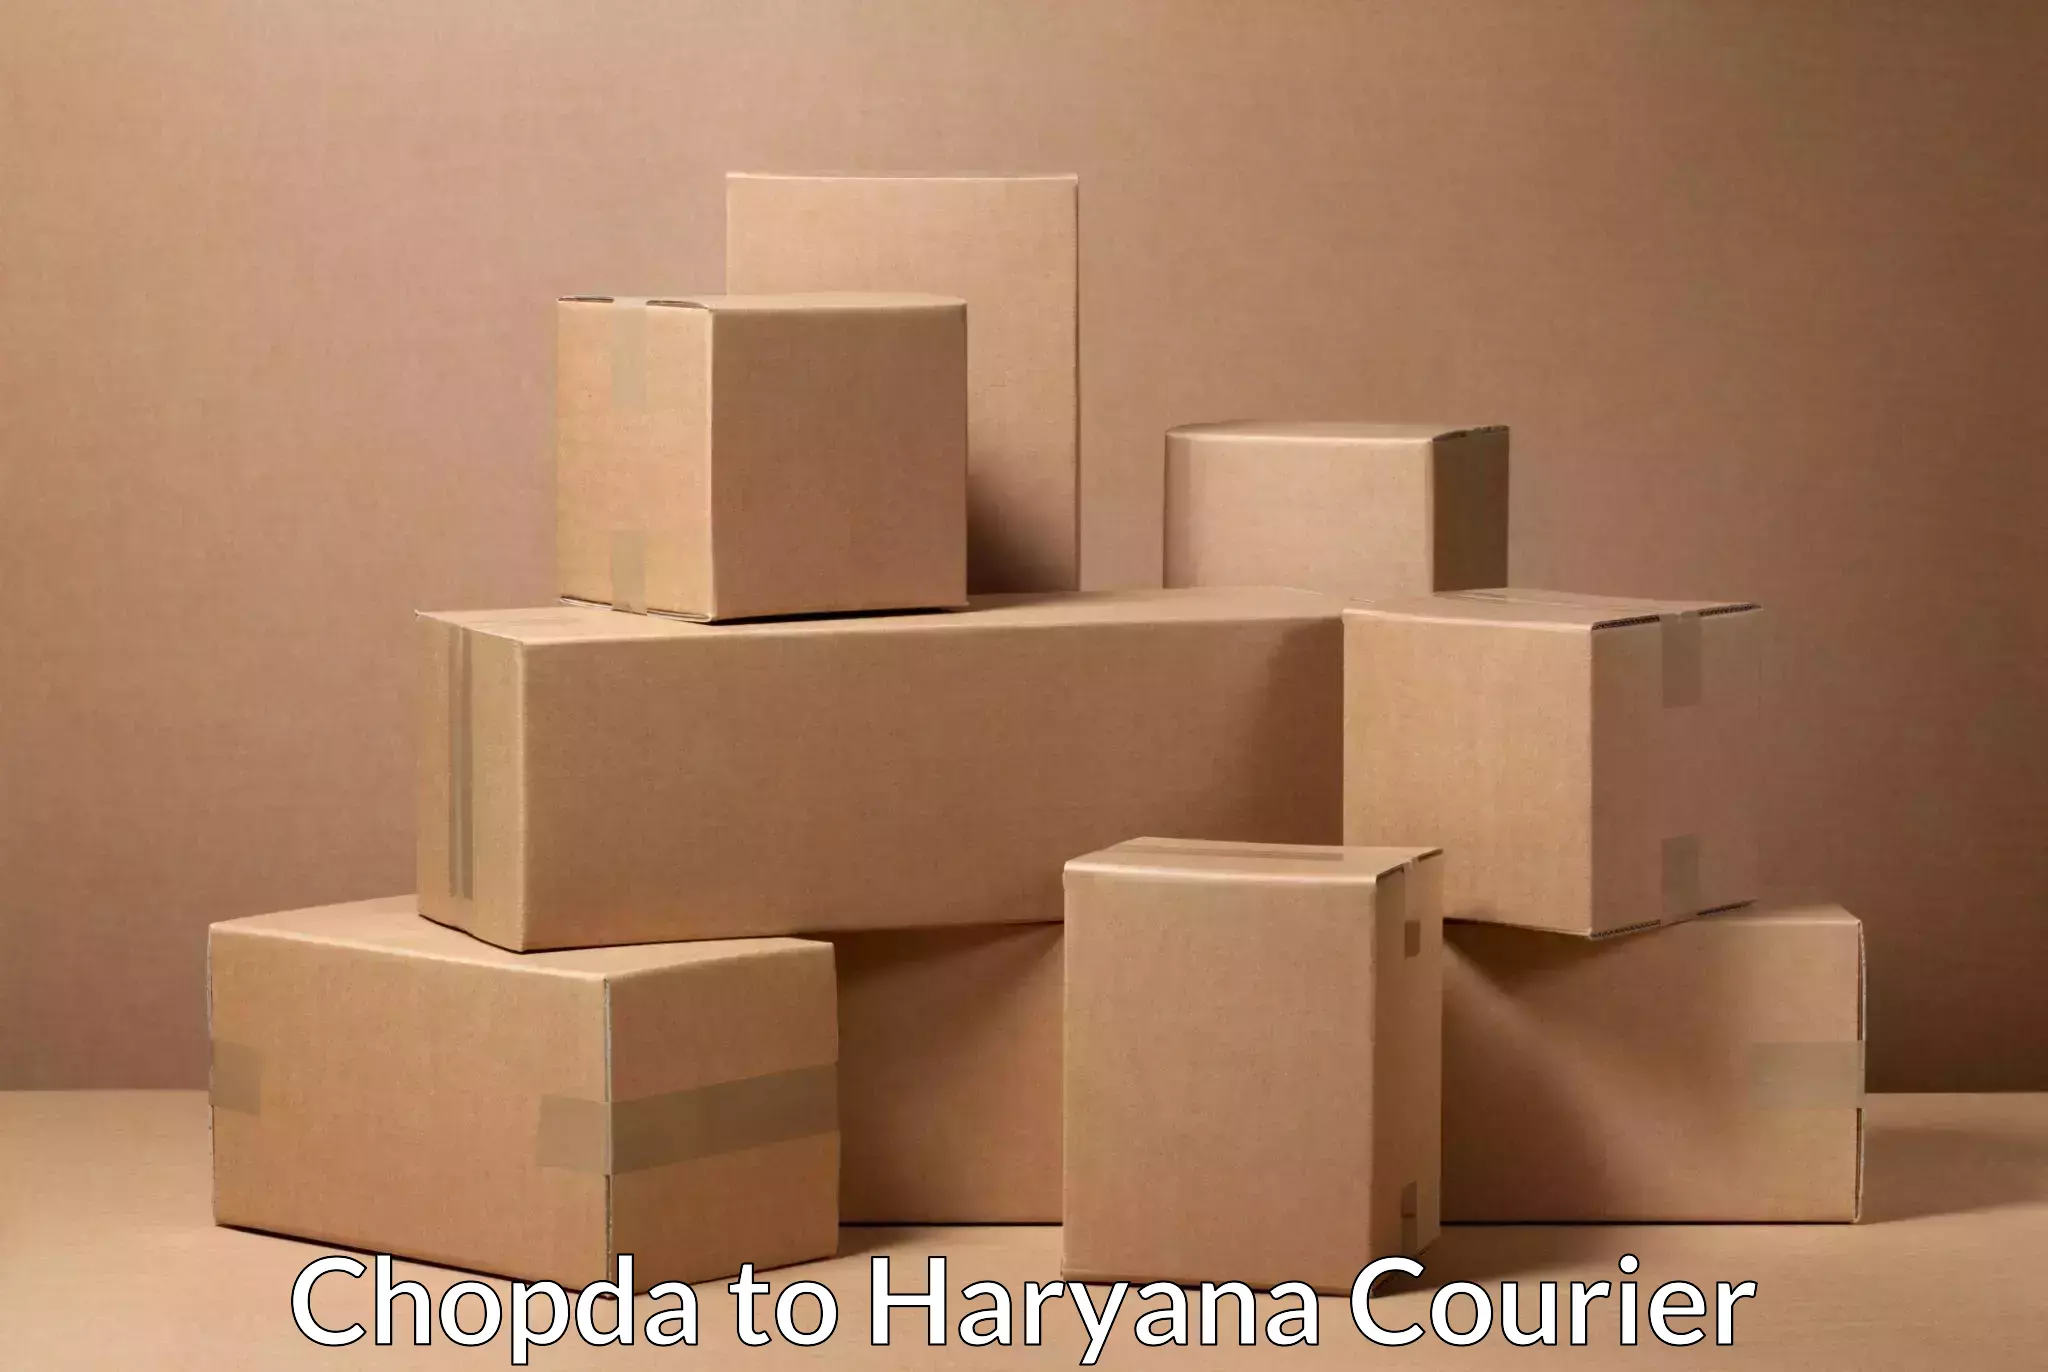 Express package services Chopda to Haryana